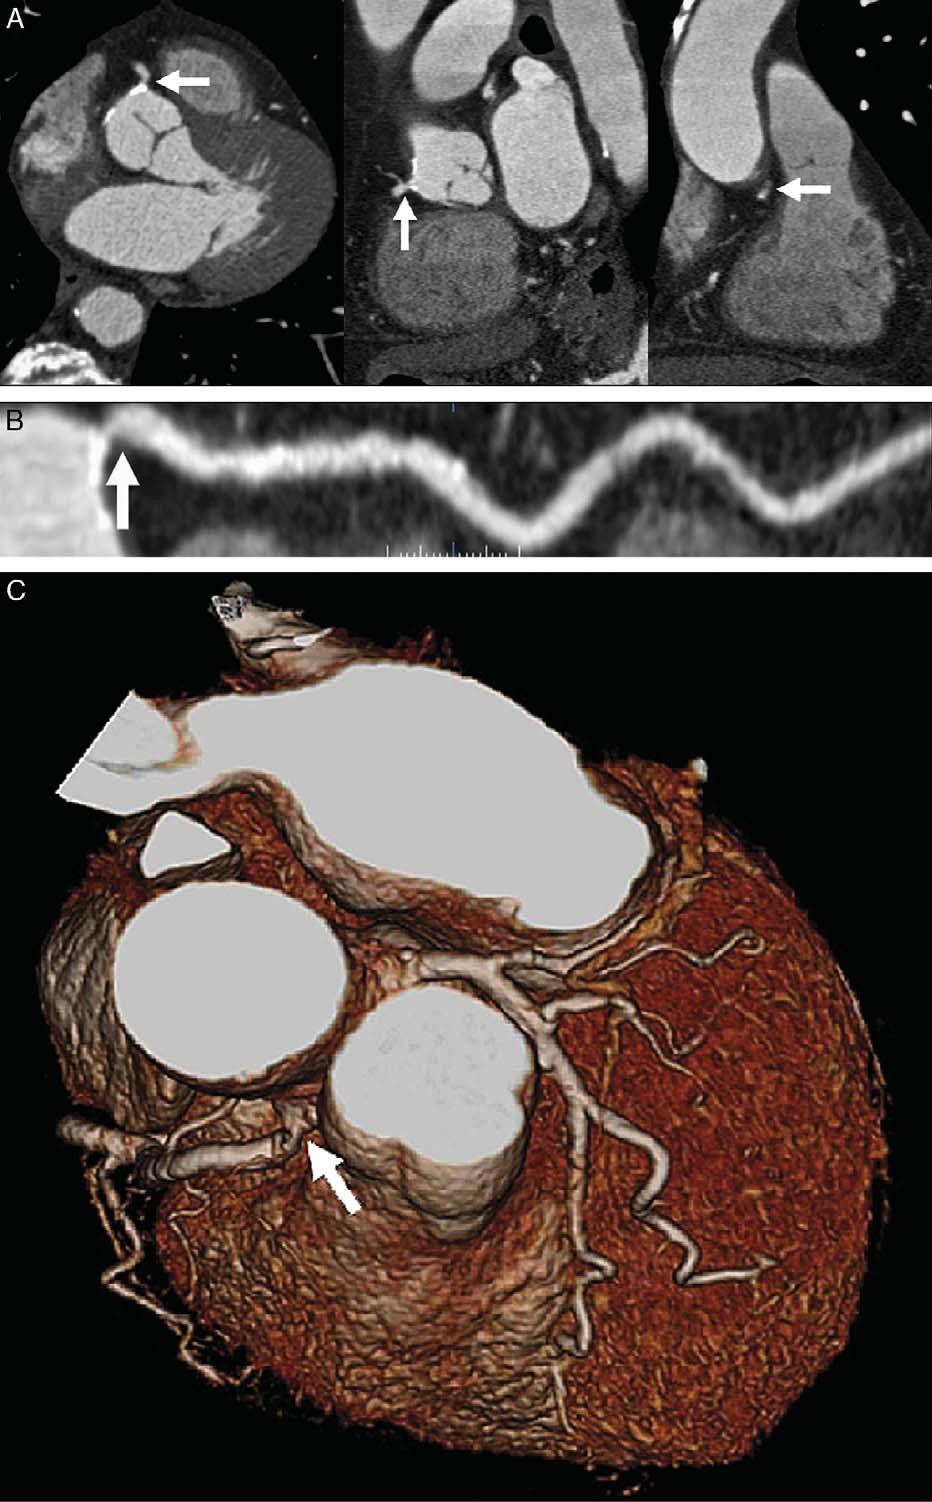 Kerl et al J Thorac Imaging Volume 22, Number 1, February 2007 FIGURE 9. Contrast enhanced, retrospectively ECG-gated dual-source CTA in a 72 year old woman with atypical chest pain.